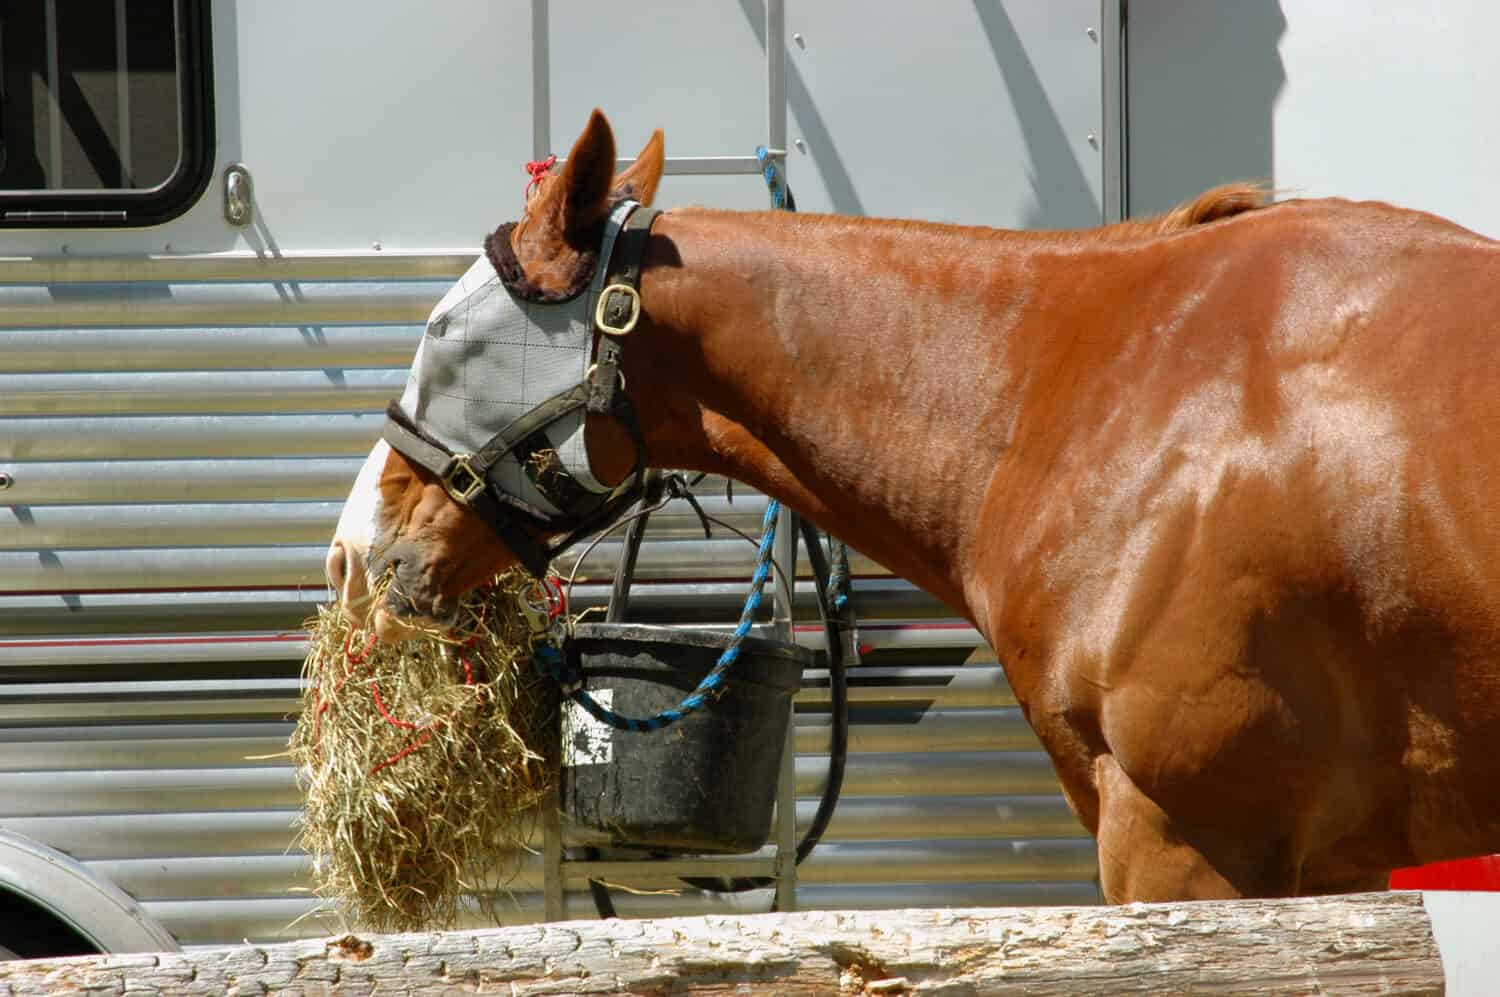 Rodeo horse eating from hay net, wearing fly mask to protect face from flies